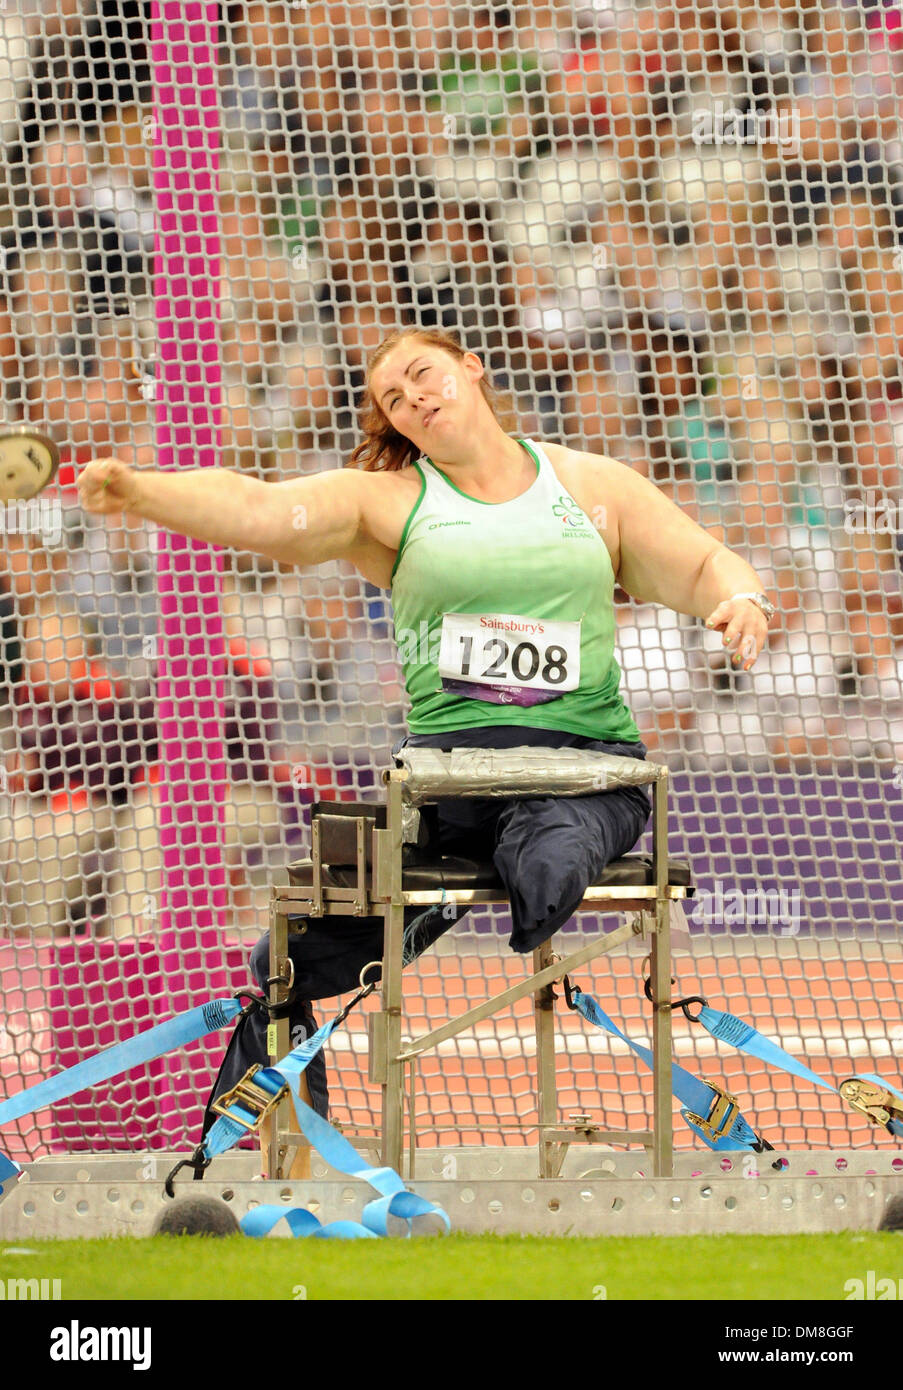 Barry Orla (IRL) in action Women's Discus Final during Day 5 of Paralympics from Olympic Stadium London England - 04.09.12 Stock Photo